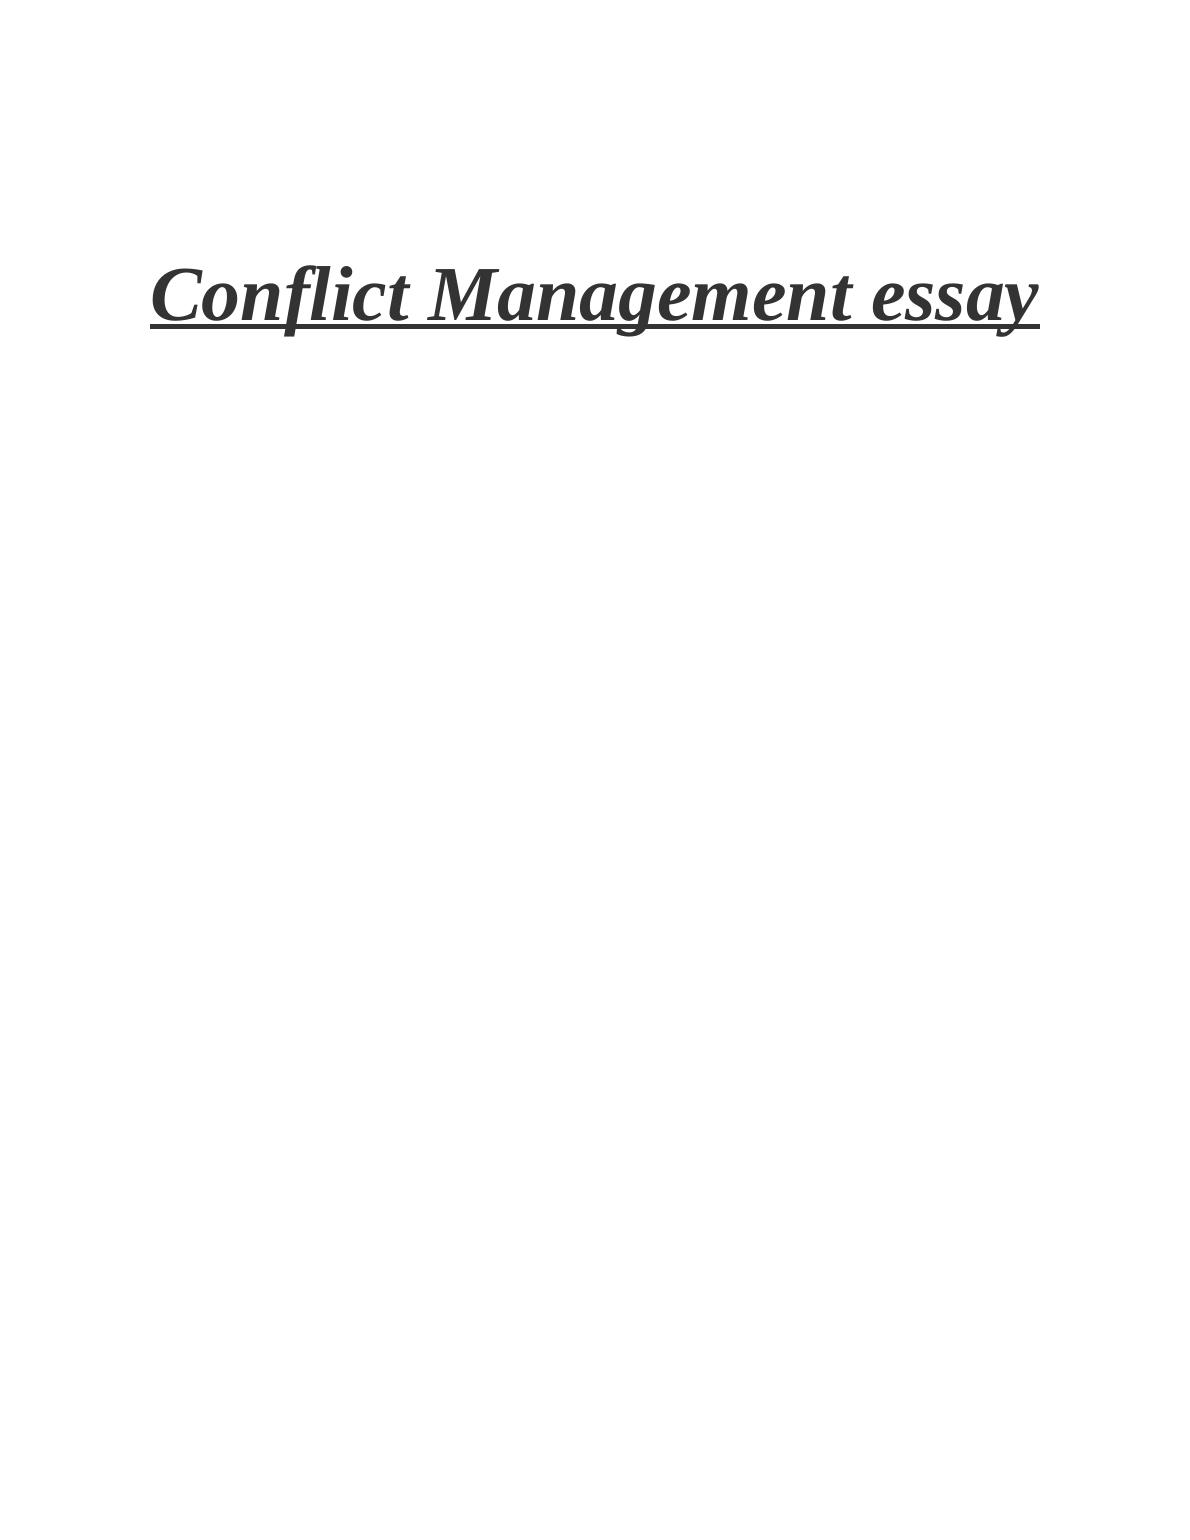 Essay on Conflict Management_1